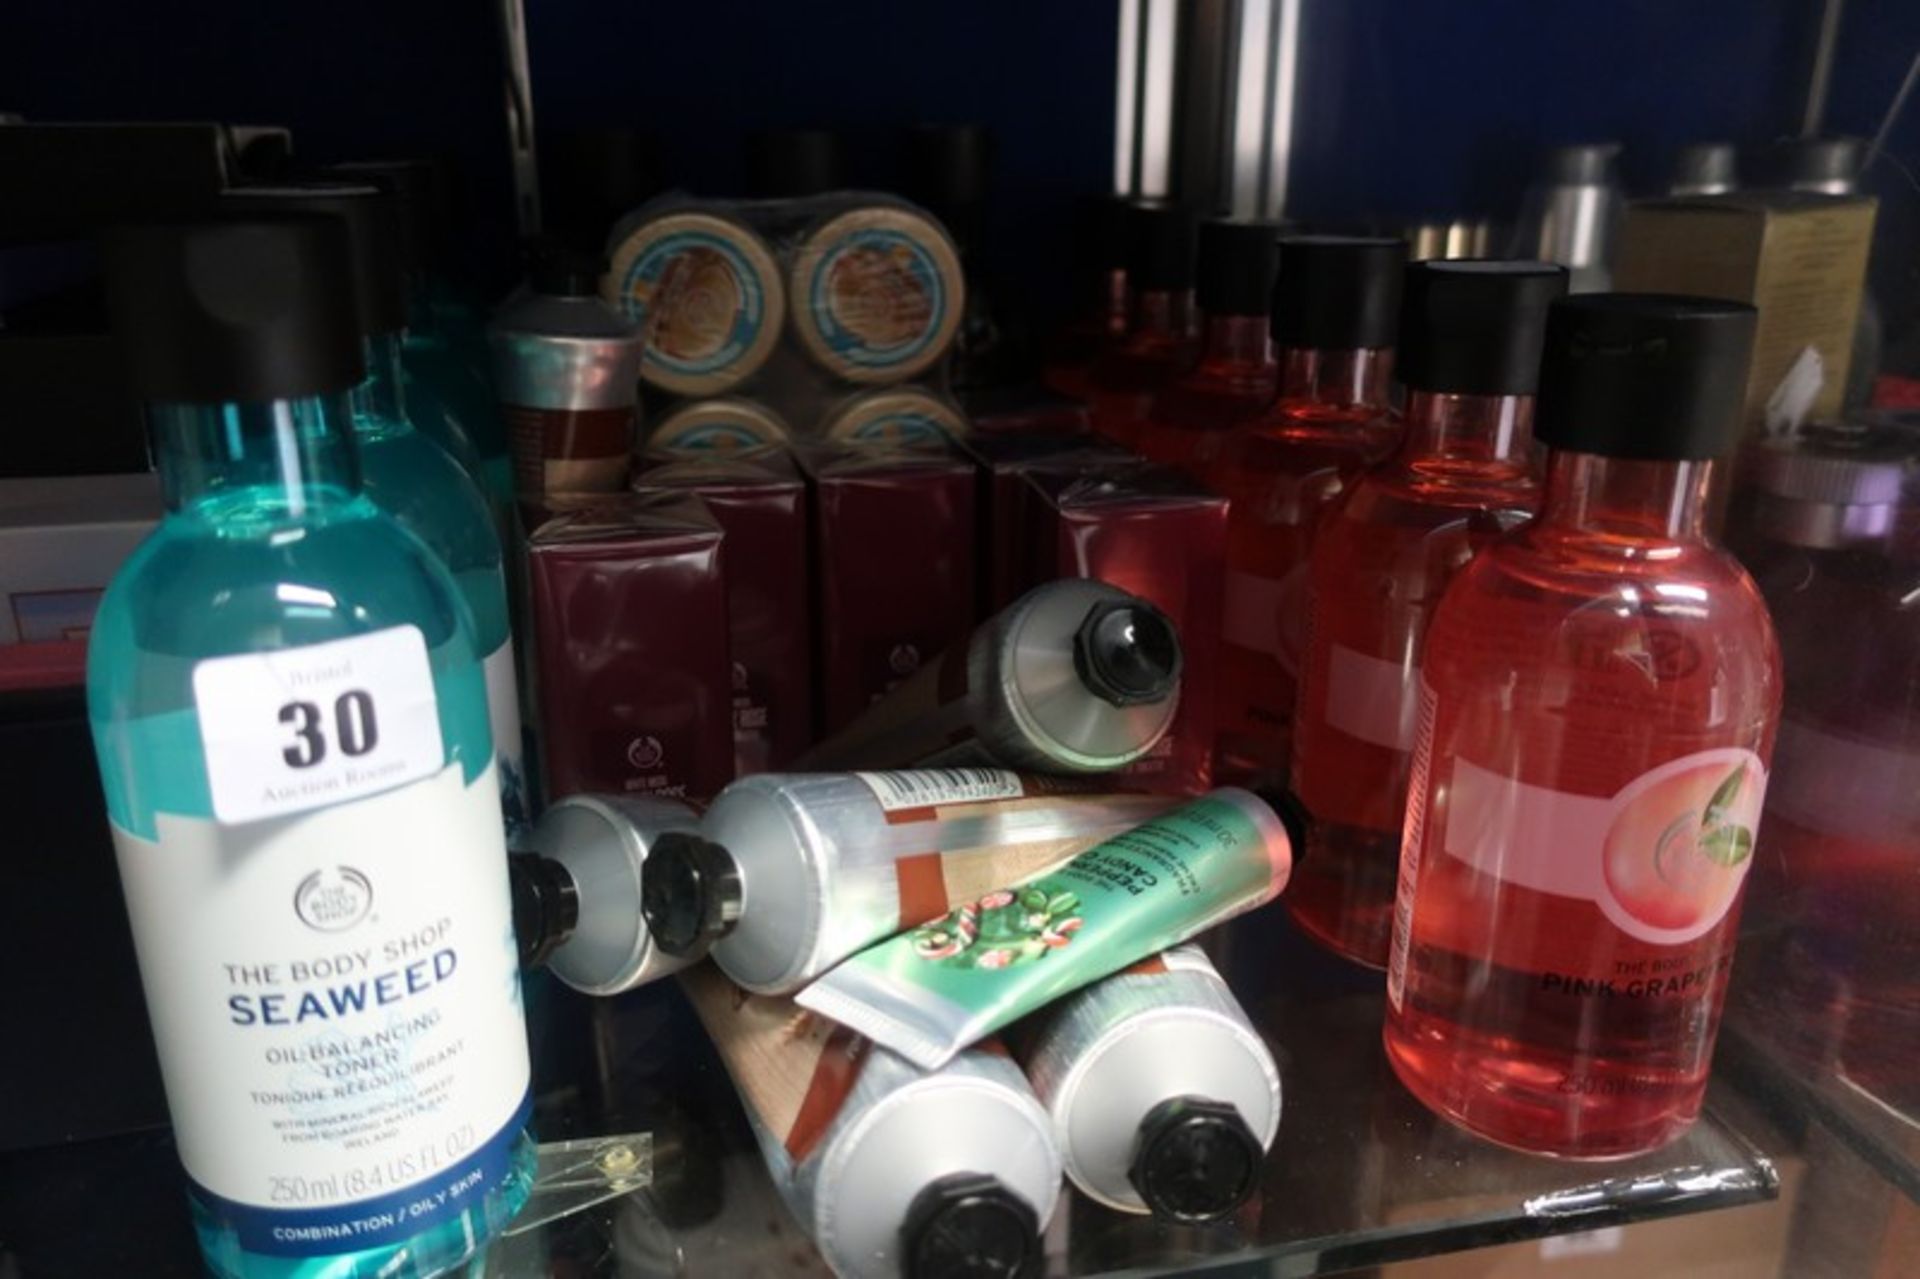 A quantity of as new Body Shop products to include shower gel, tonic and smoky rose eau de